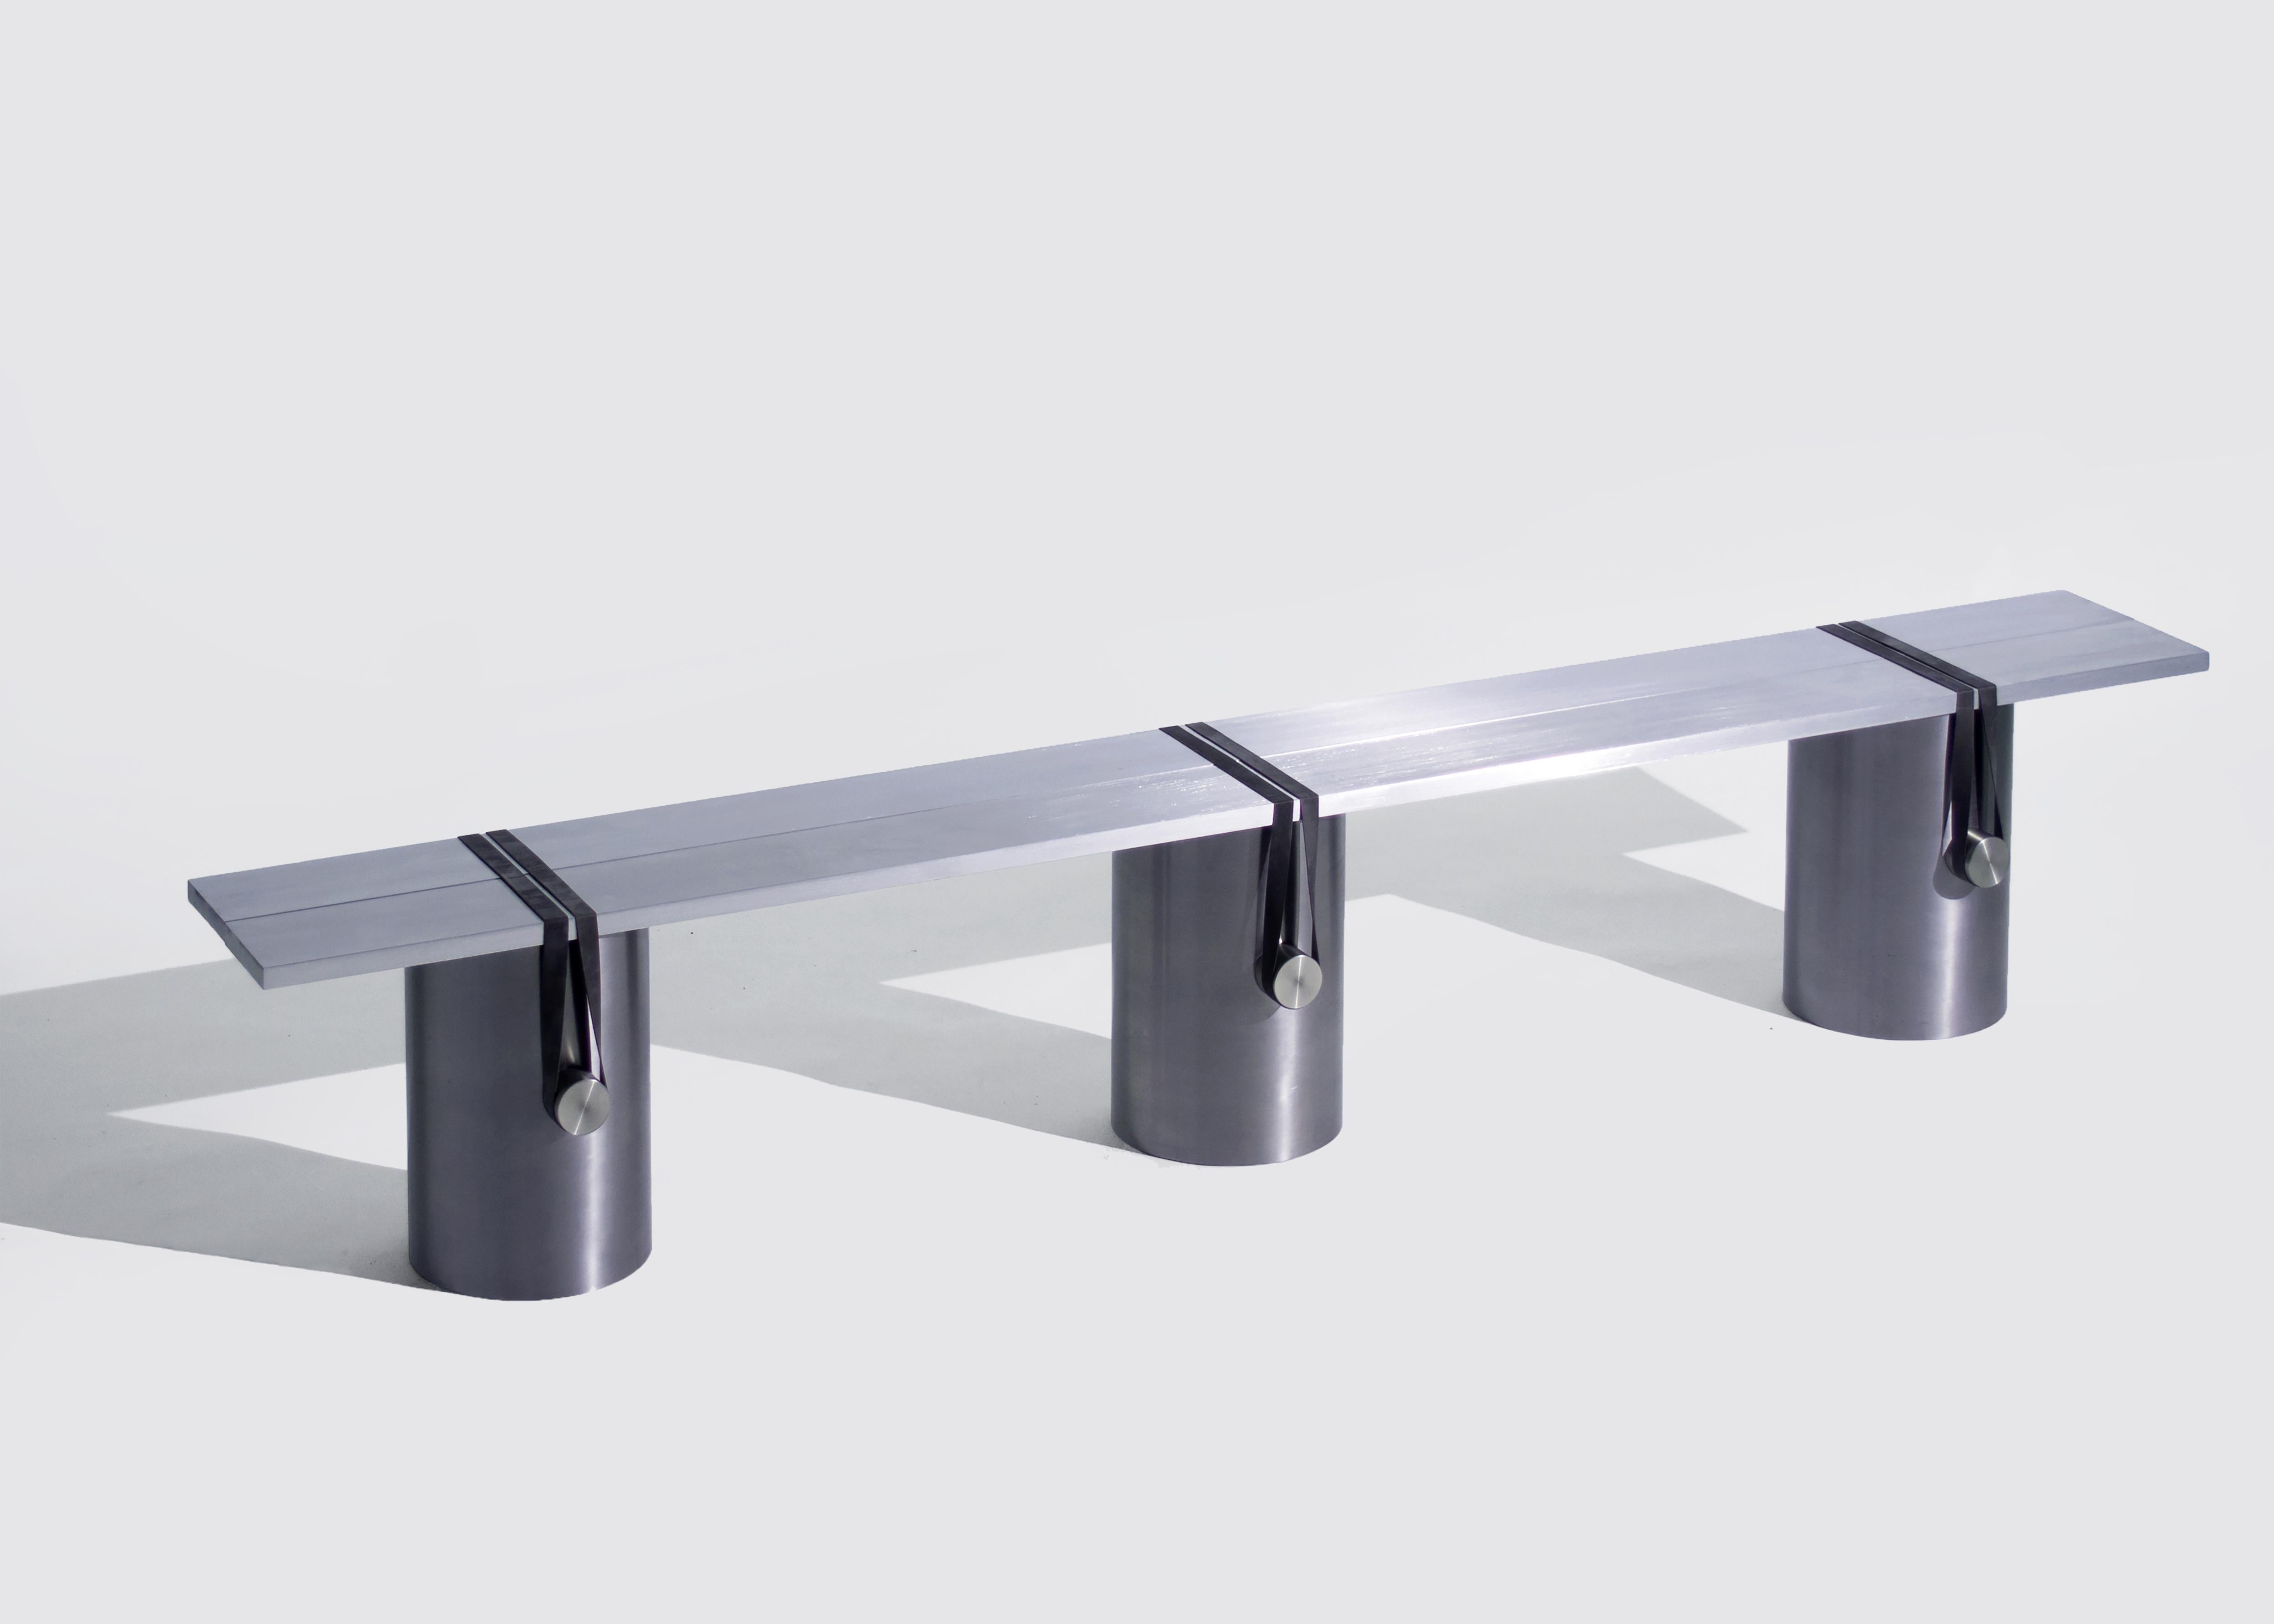 Anodised contemporary bench by Johan Viladrich
Anodised Aluminum, Rubber
L200 x W24 x H38 cm
Approx. 60kg
Limited Edition for Jonathan


Johan Viladrich is an internationally famous contemporary designer.
A pure design with essential forms